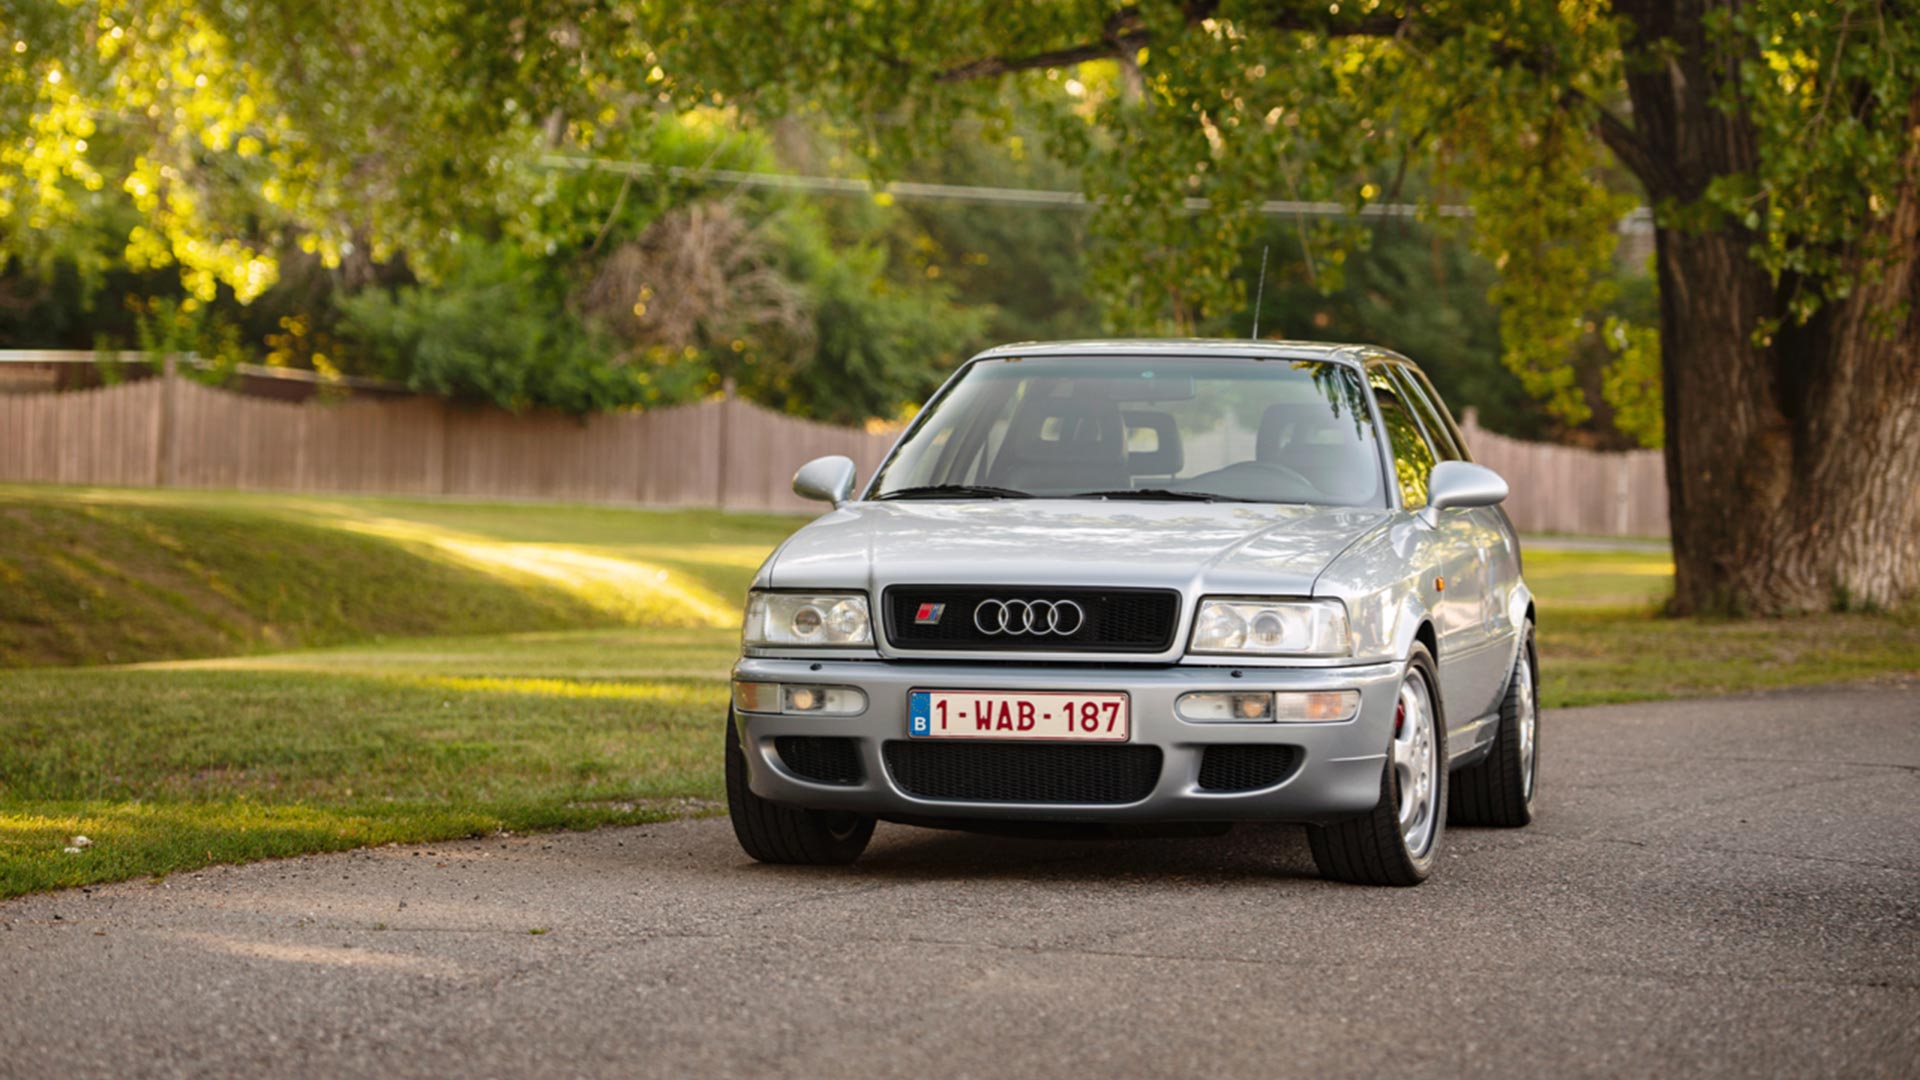 No need to wait for a fast Audi station wagon with this RS2 Avant